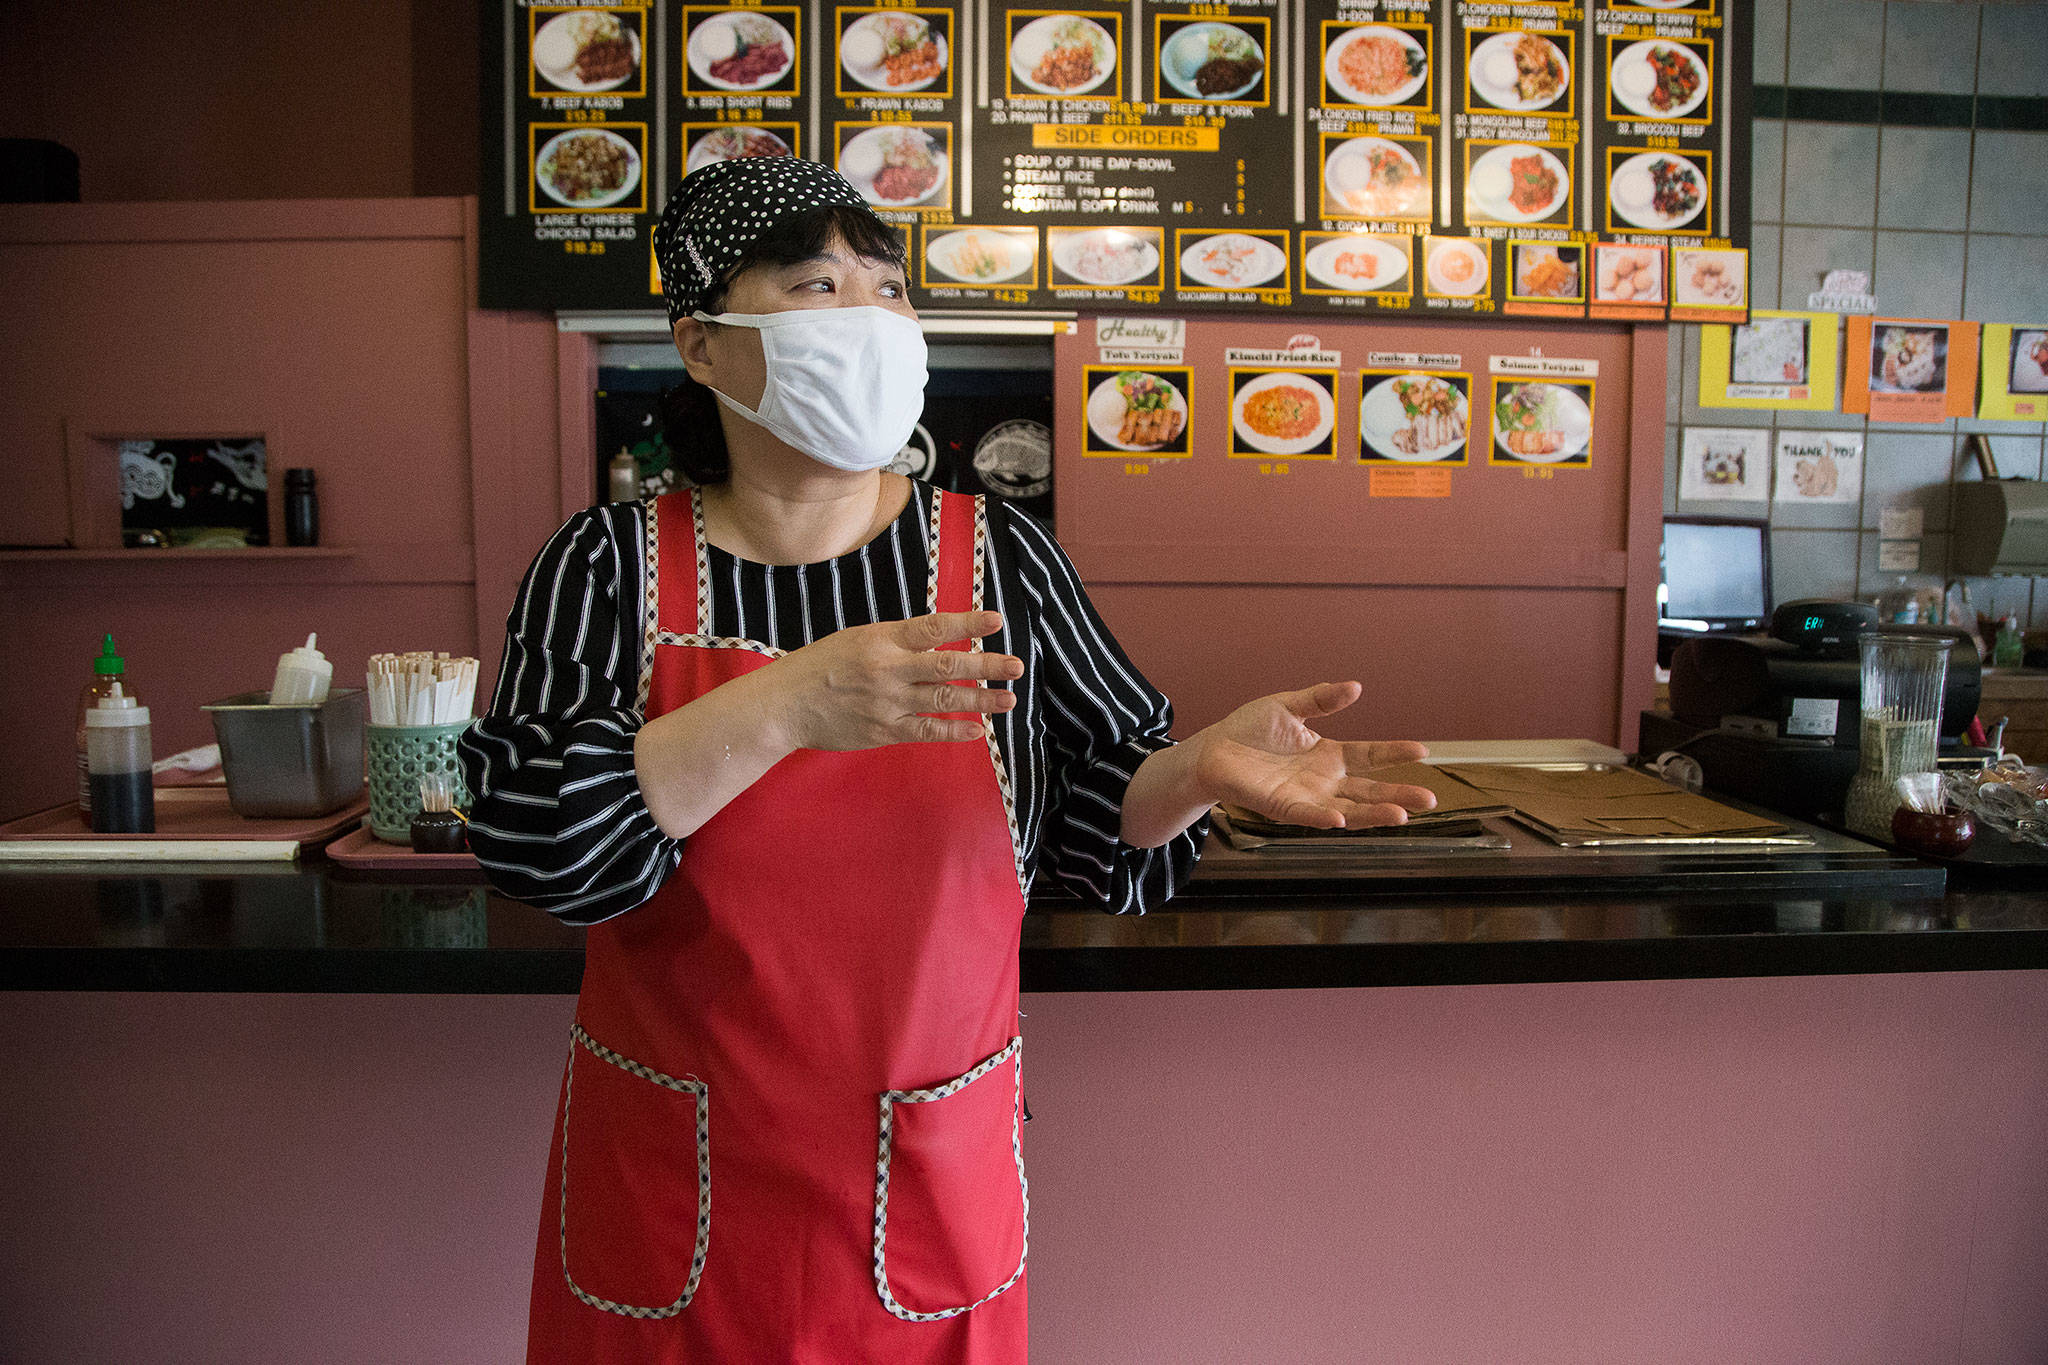 Sun Ho, owner of the Happy Tummy Grill, talks about the loss of business after Boeing announced the future closing of the 787 line. “If Boeing shuts down, I’m shut down too,” Ho said. (Andy Bronson / The Herald)